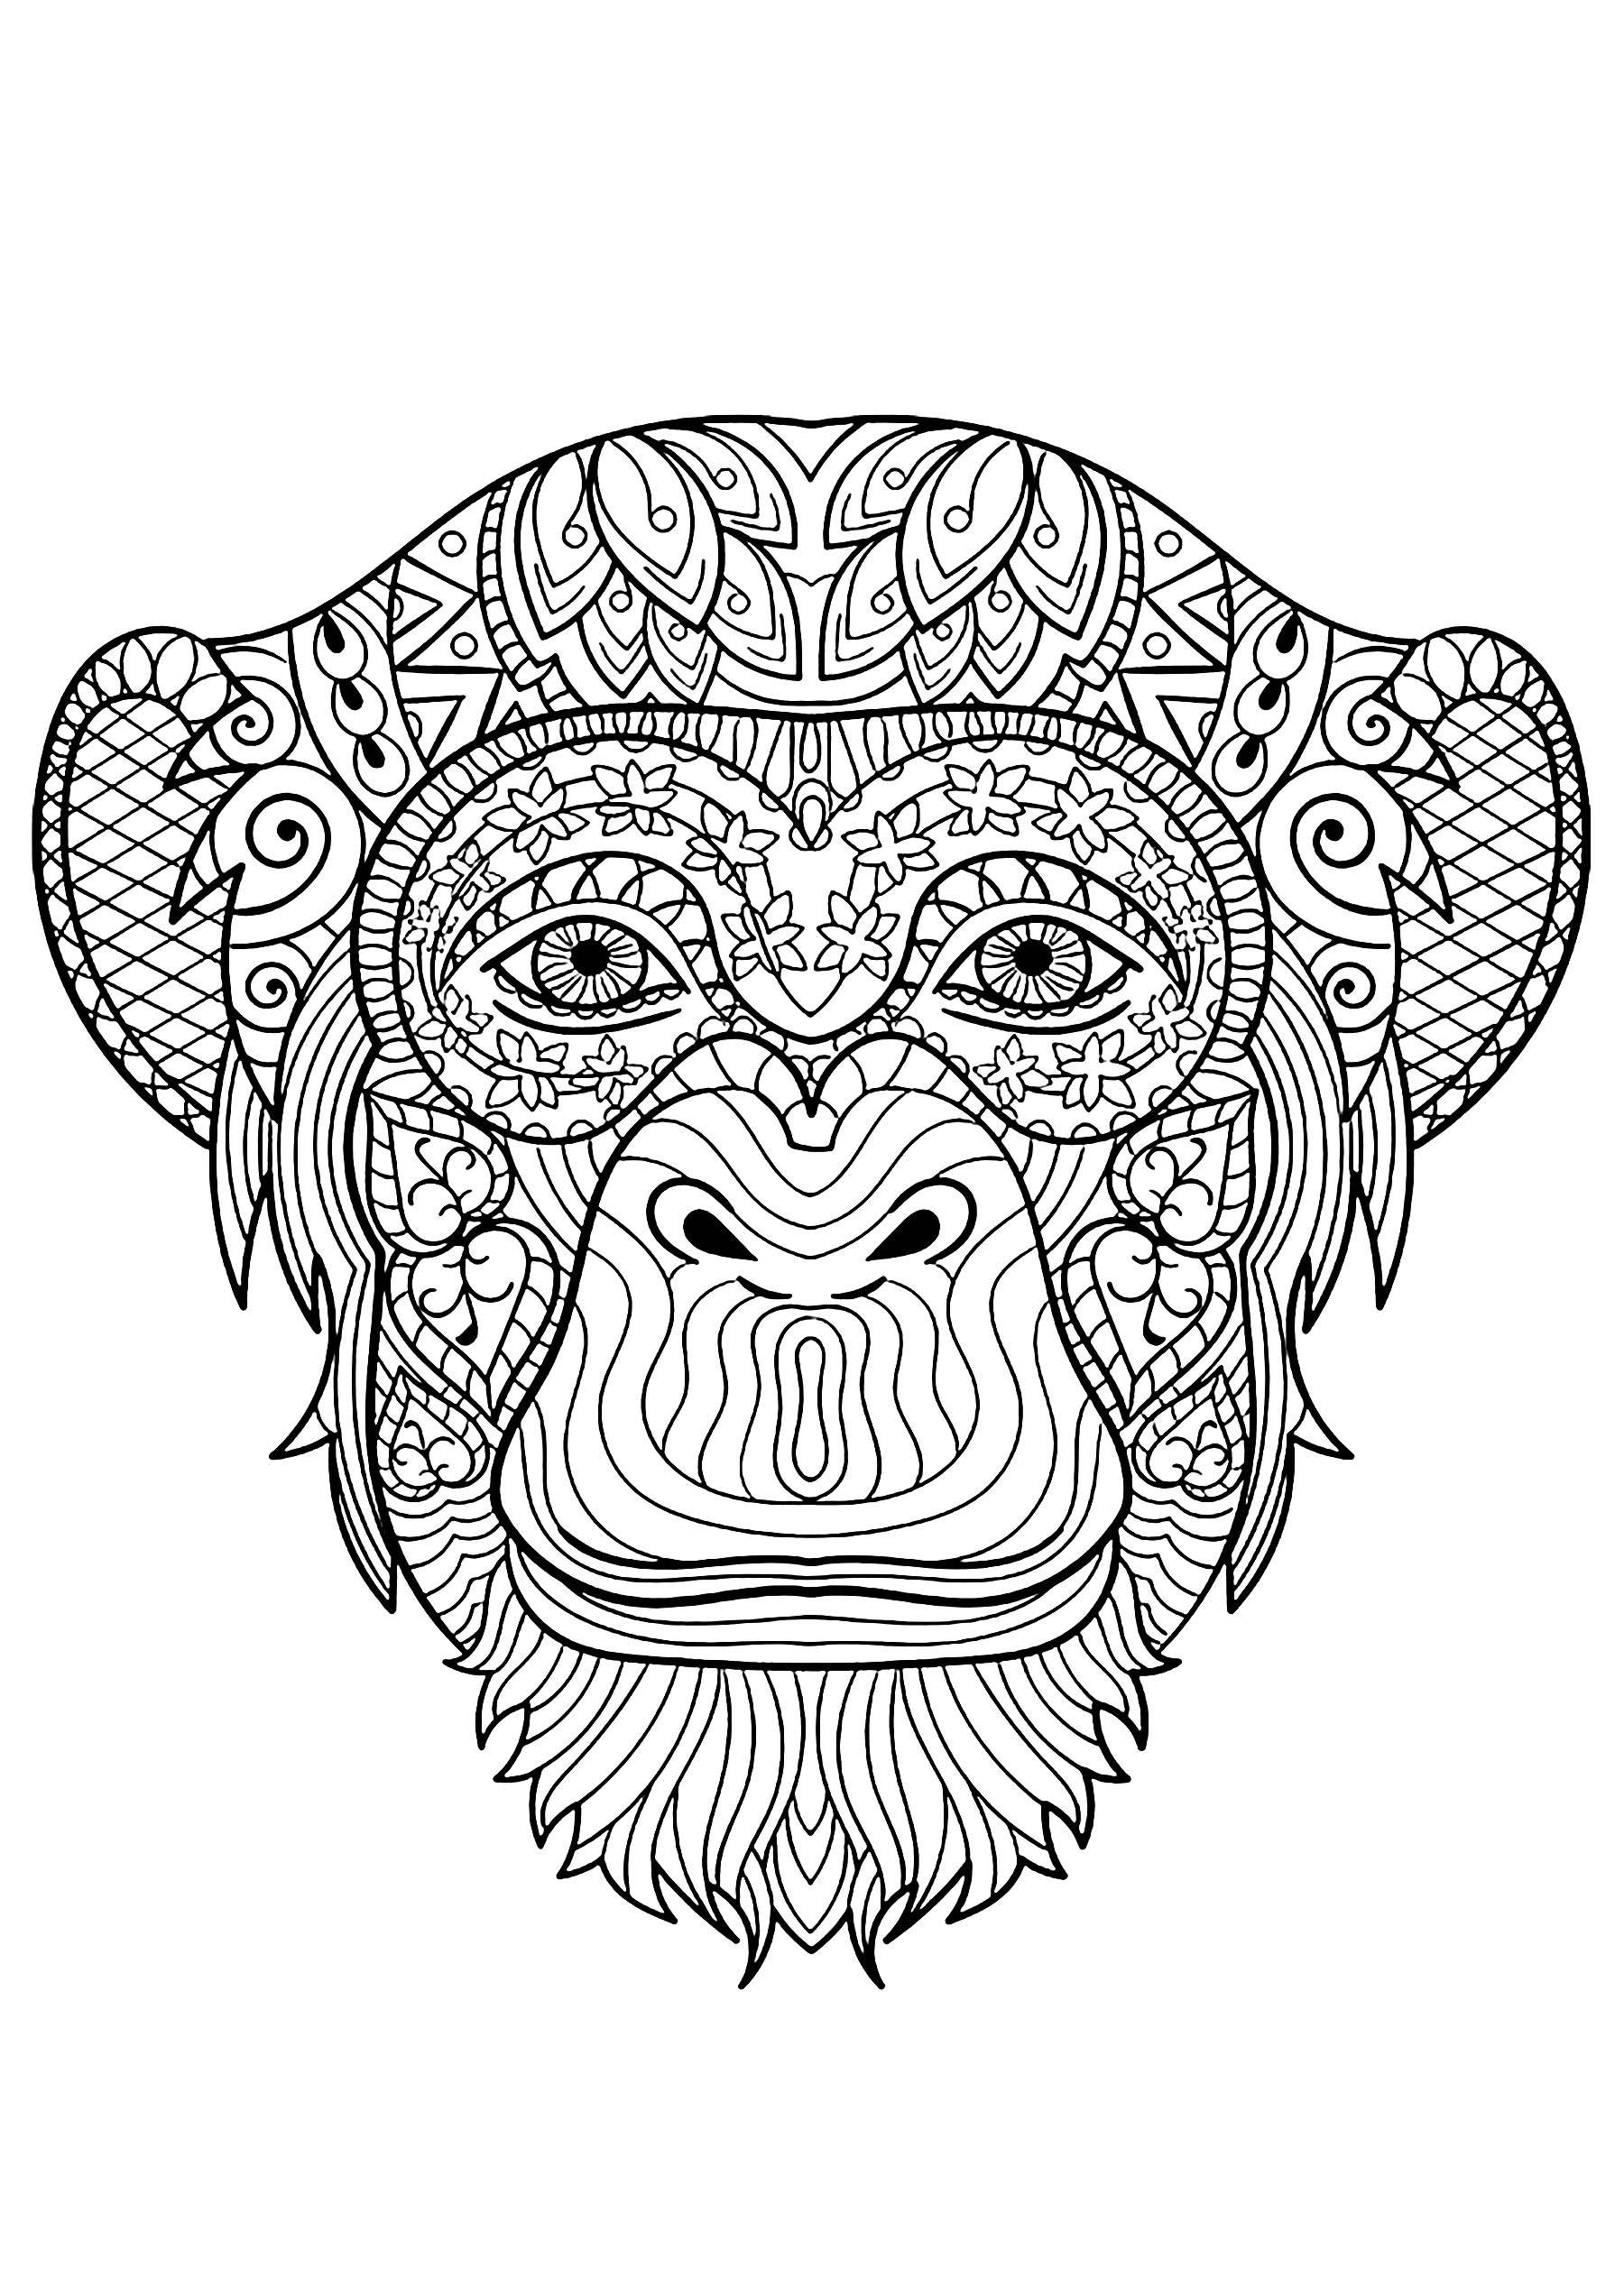 Beautiful monkey head to color, with beautiful patterns